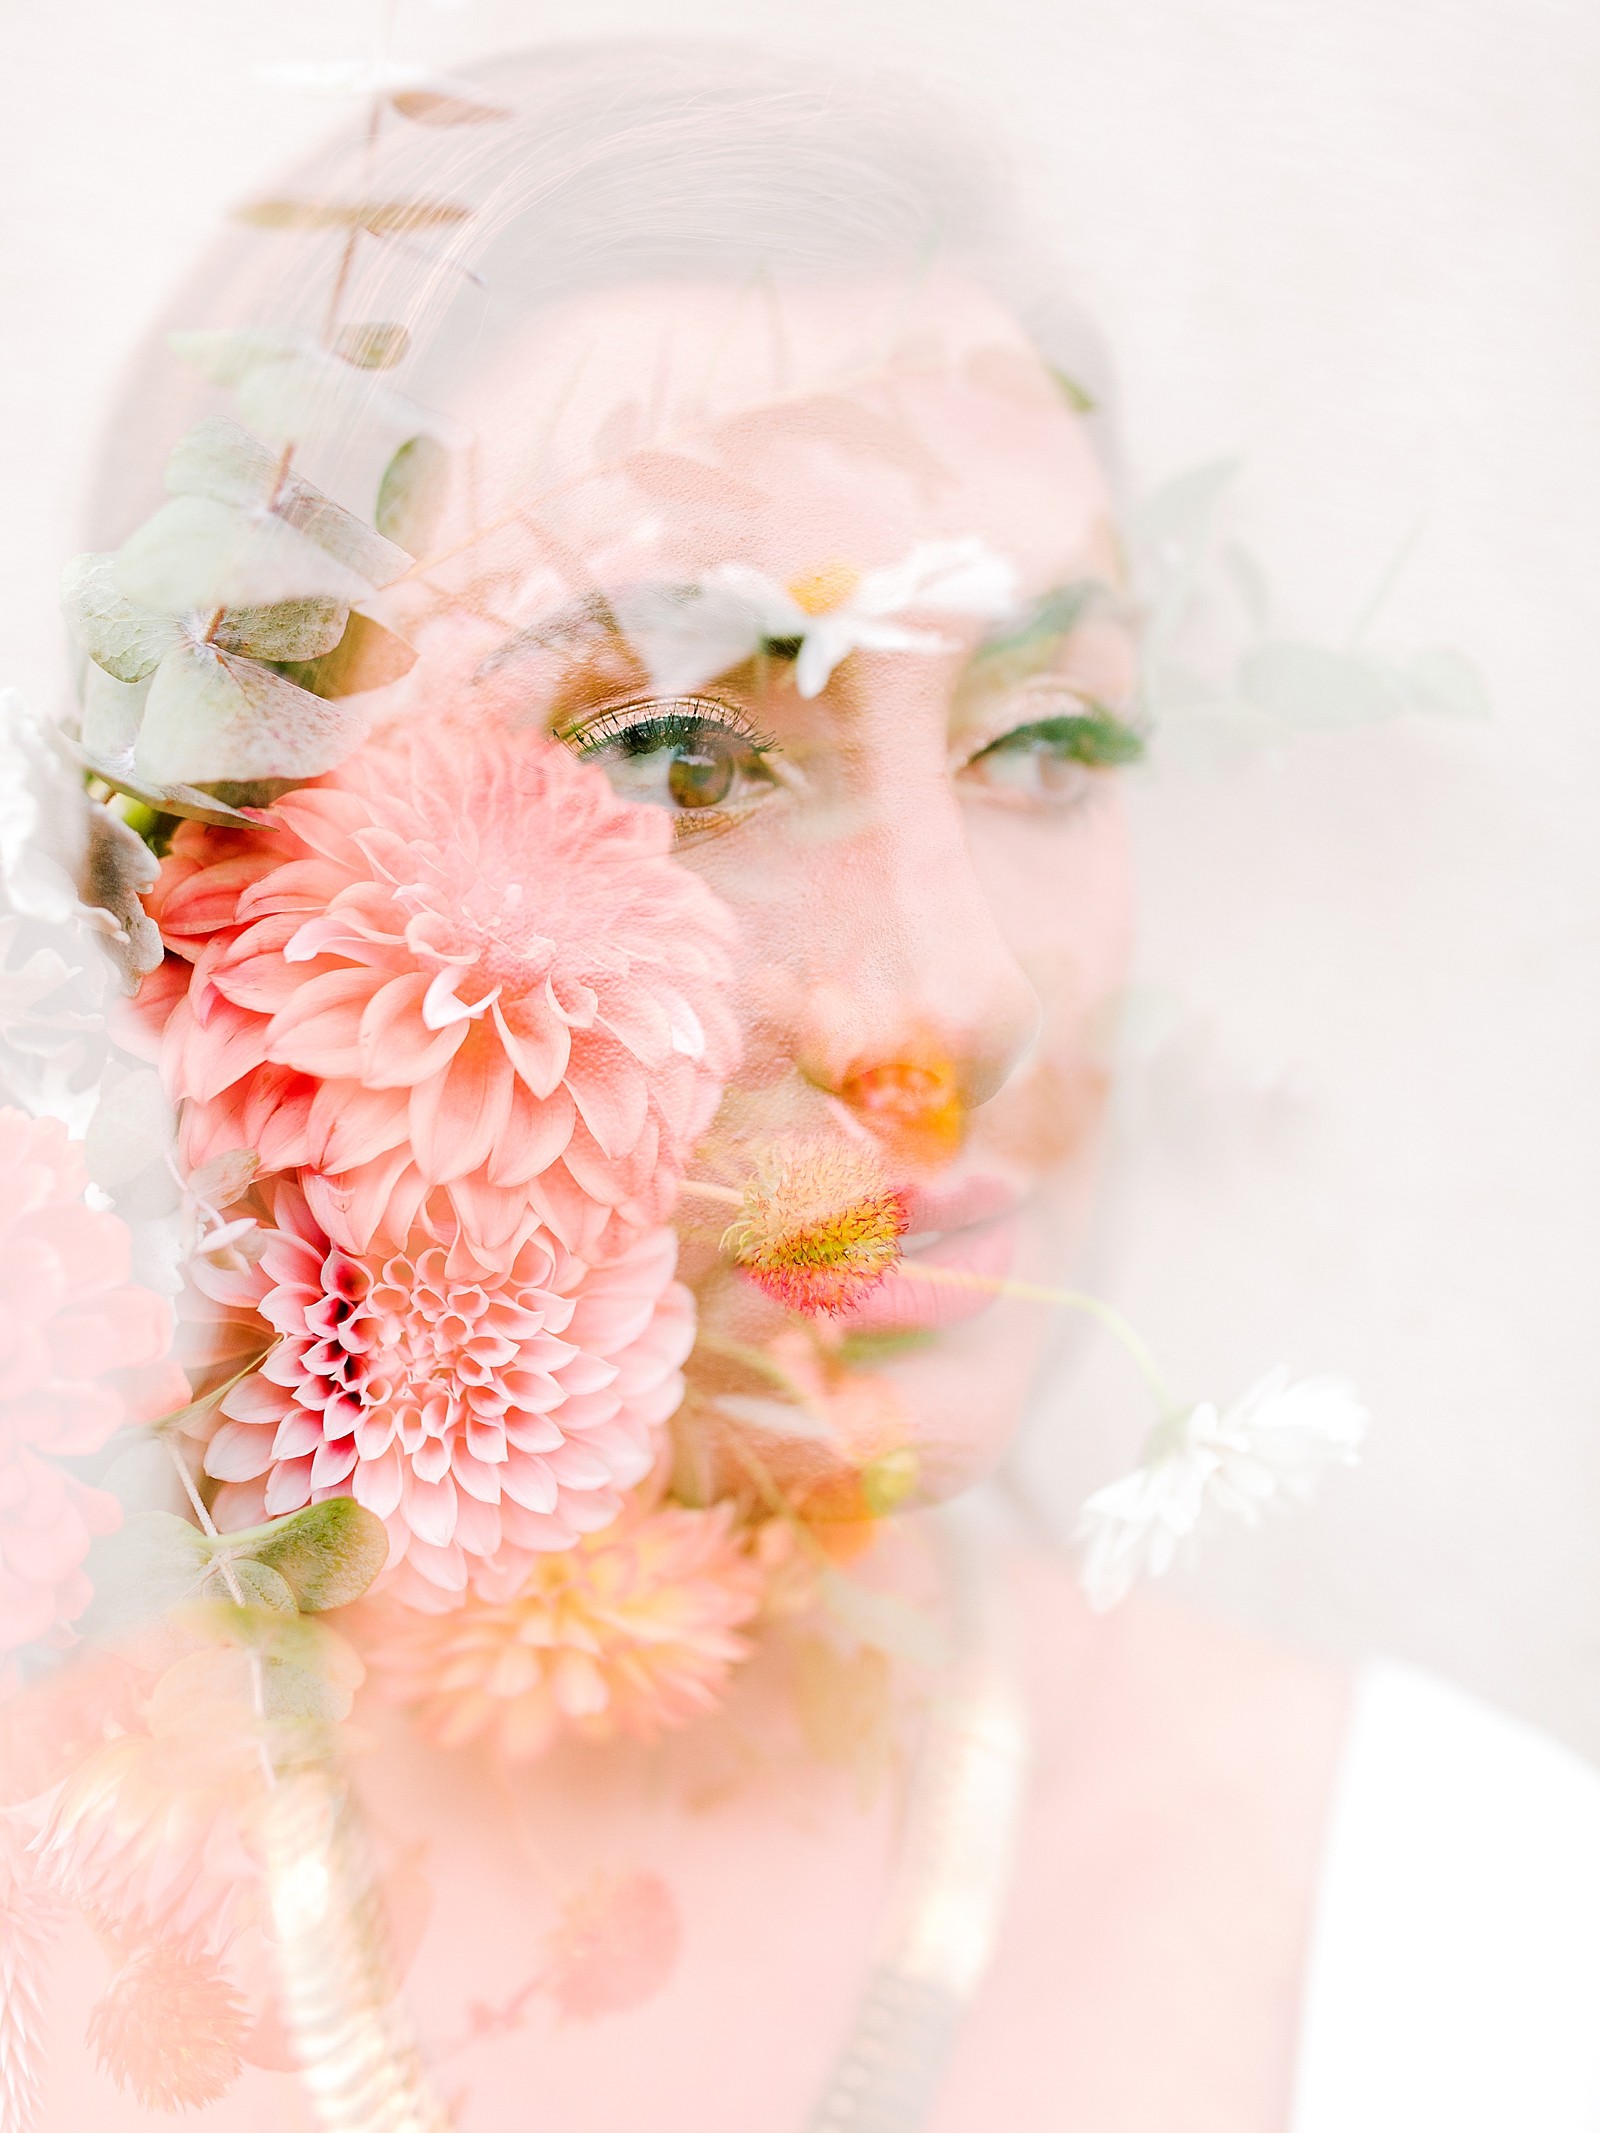 Birmingham Wedding Fall Floral Bridal and Bouquet Double Exposure Photo